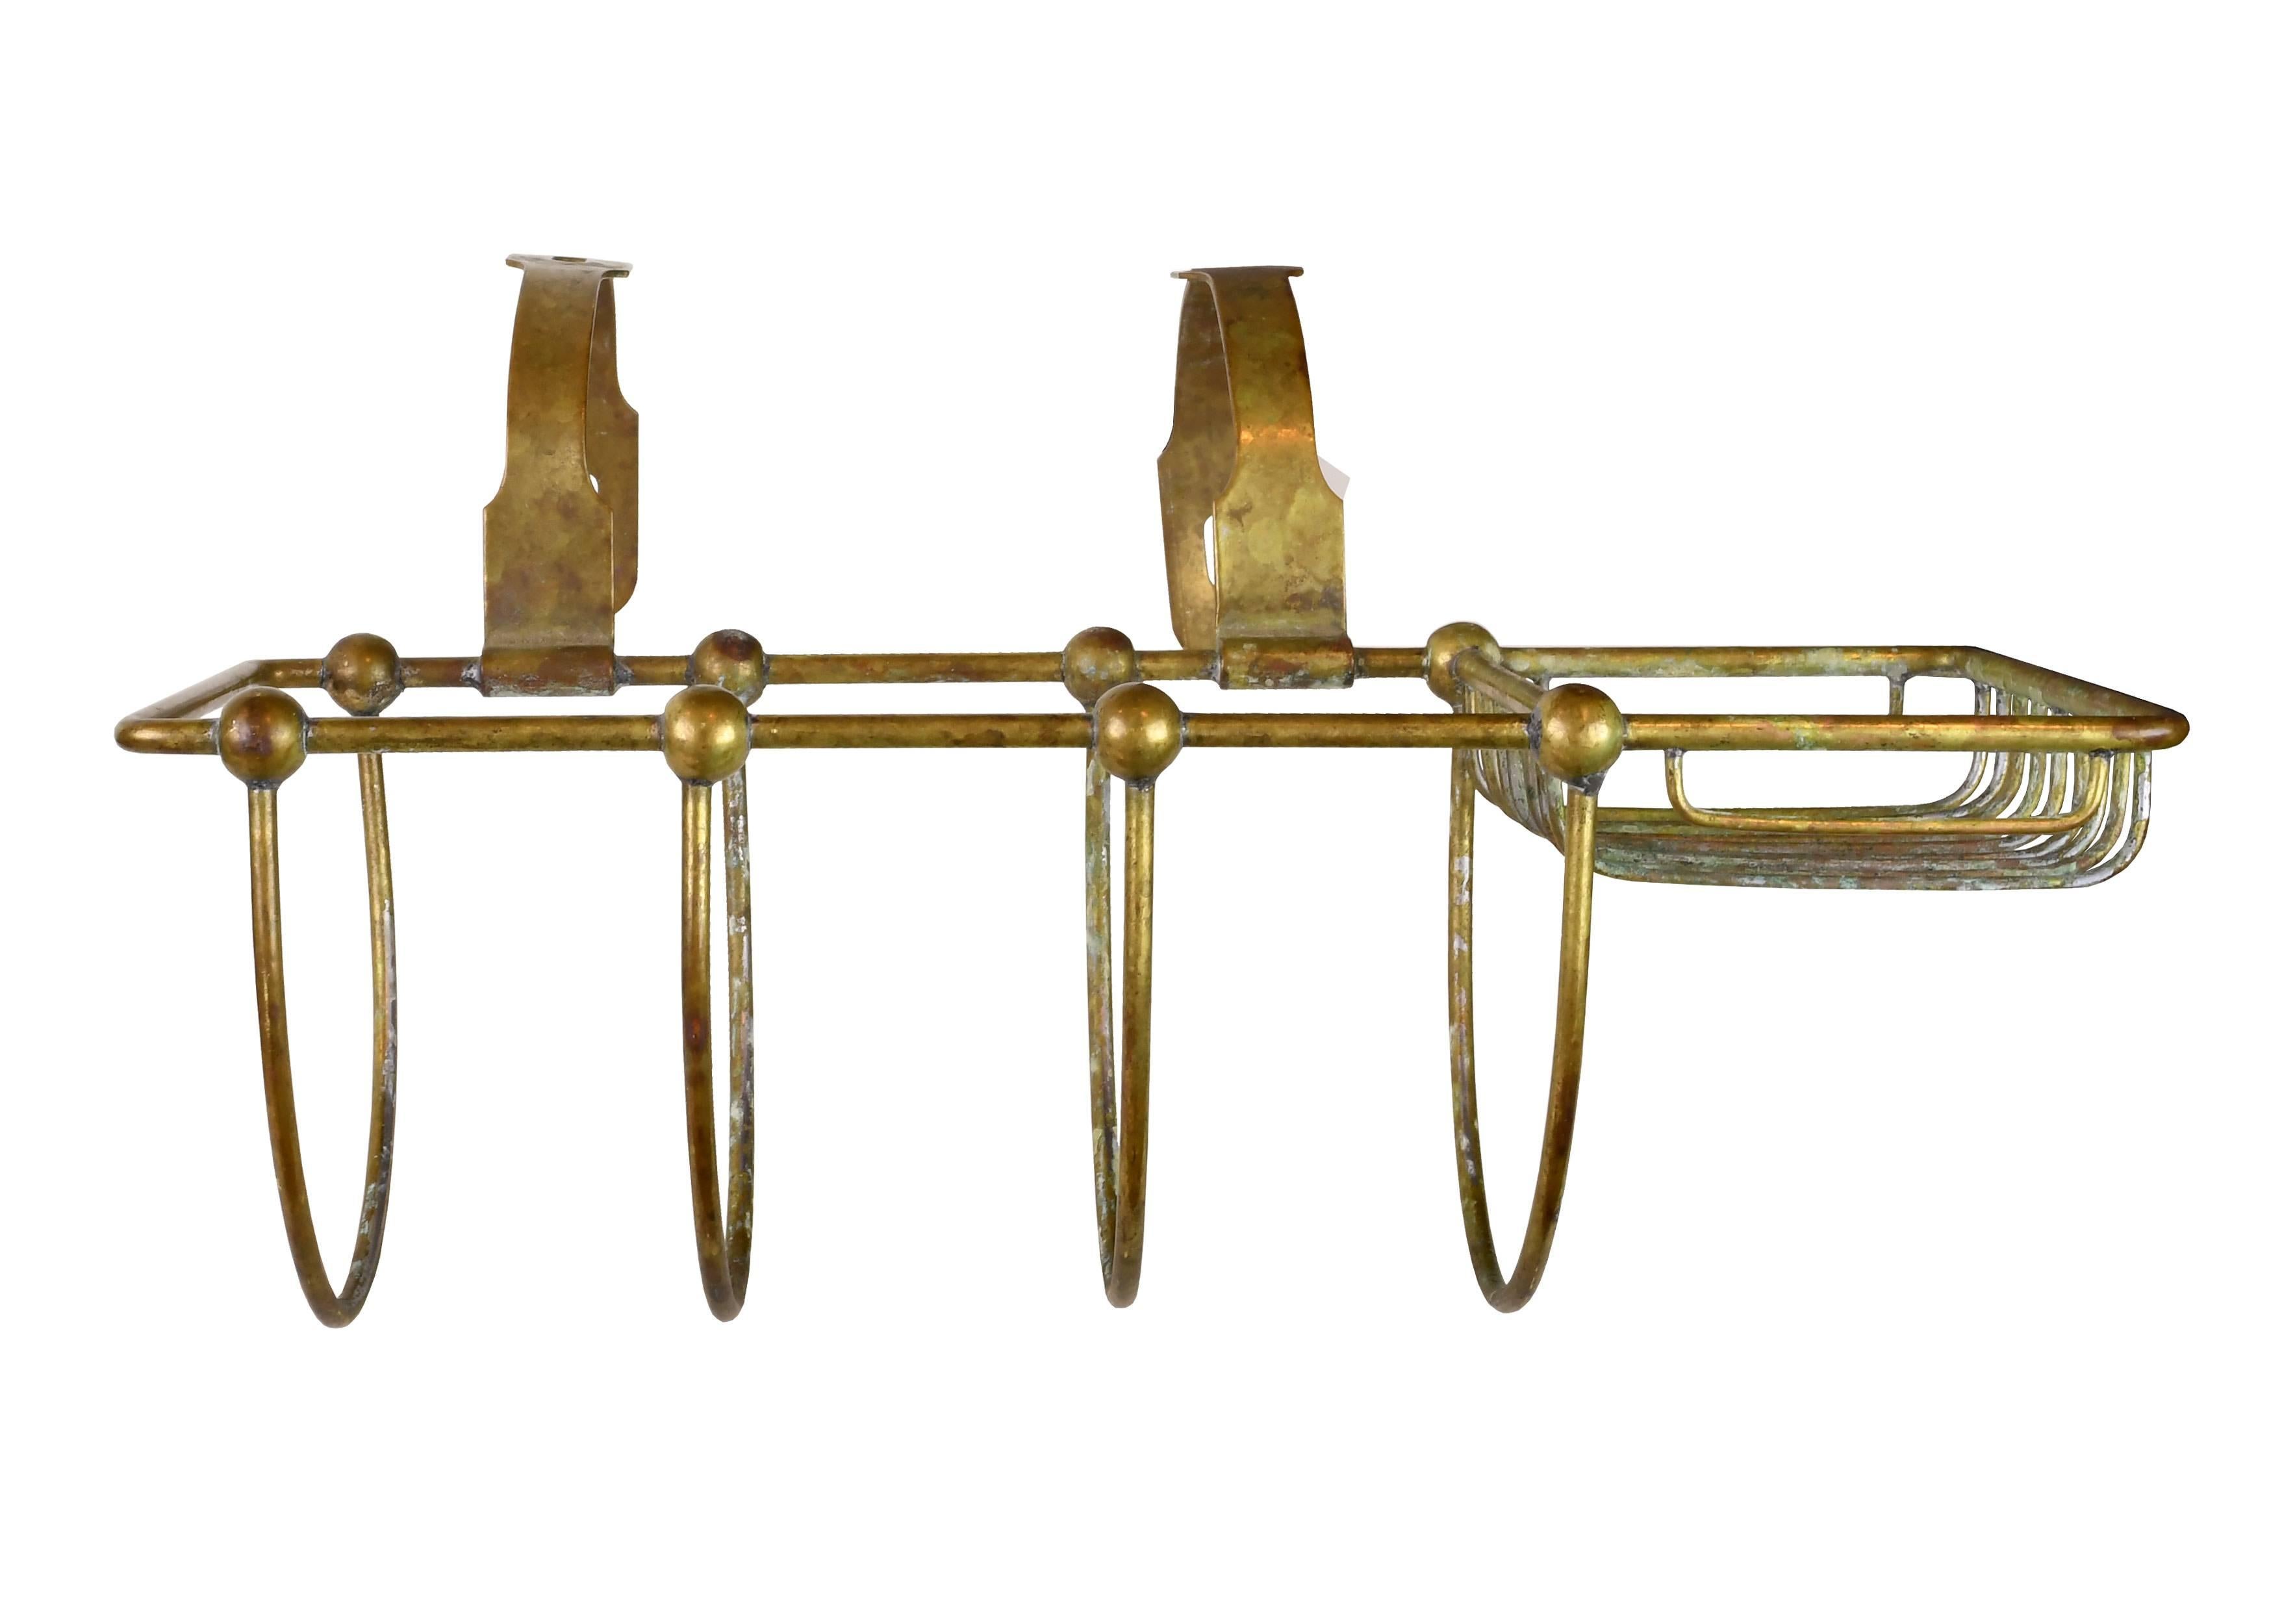 This fantastic brass soap holder mounts to the side of the tub and features two separate slots for sponges, soap, loofahs, and other small cleaning implements. An imprint on the bottom marks the patent date as February 6, 1900. A healthy dose of